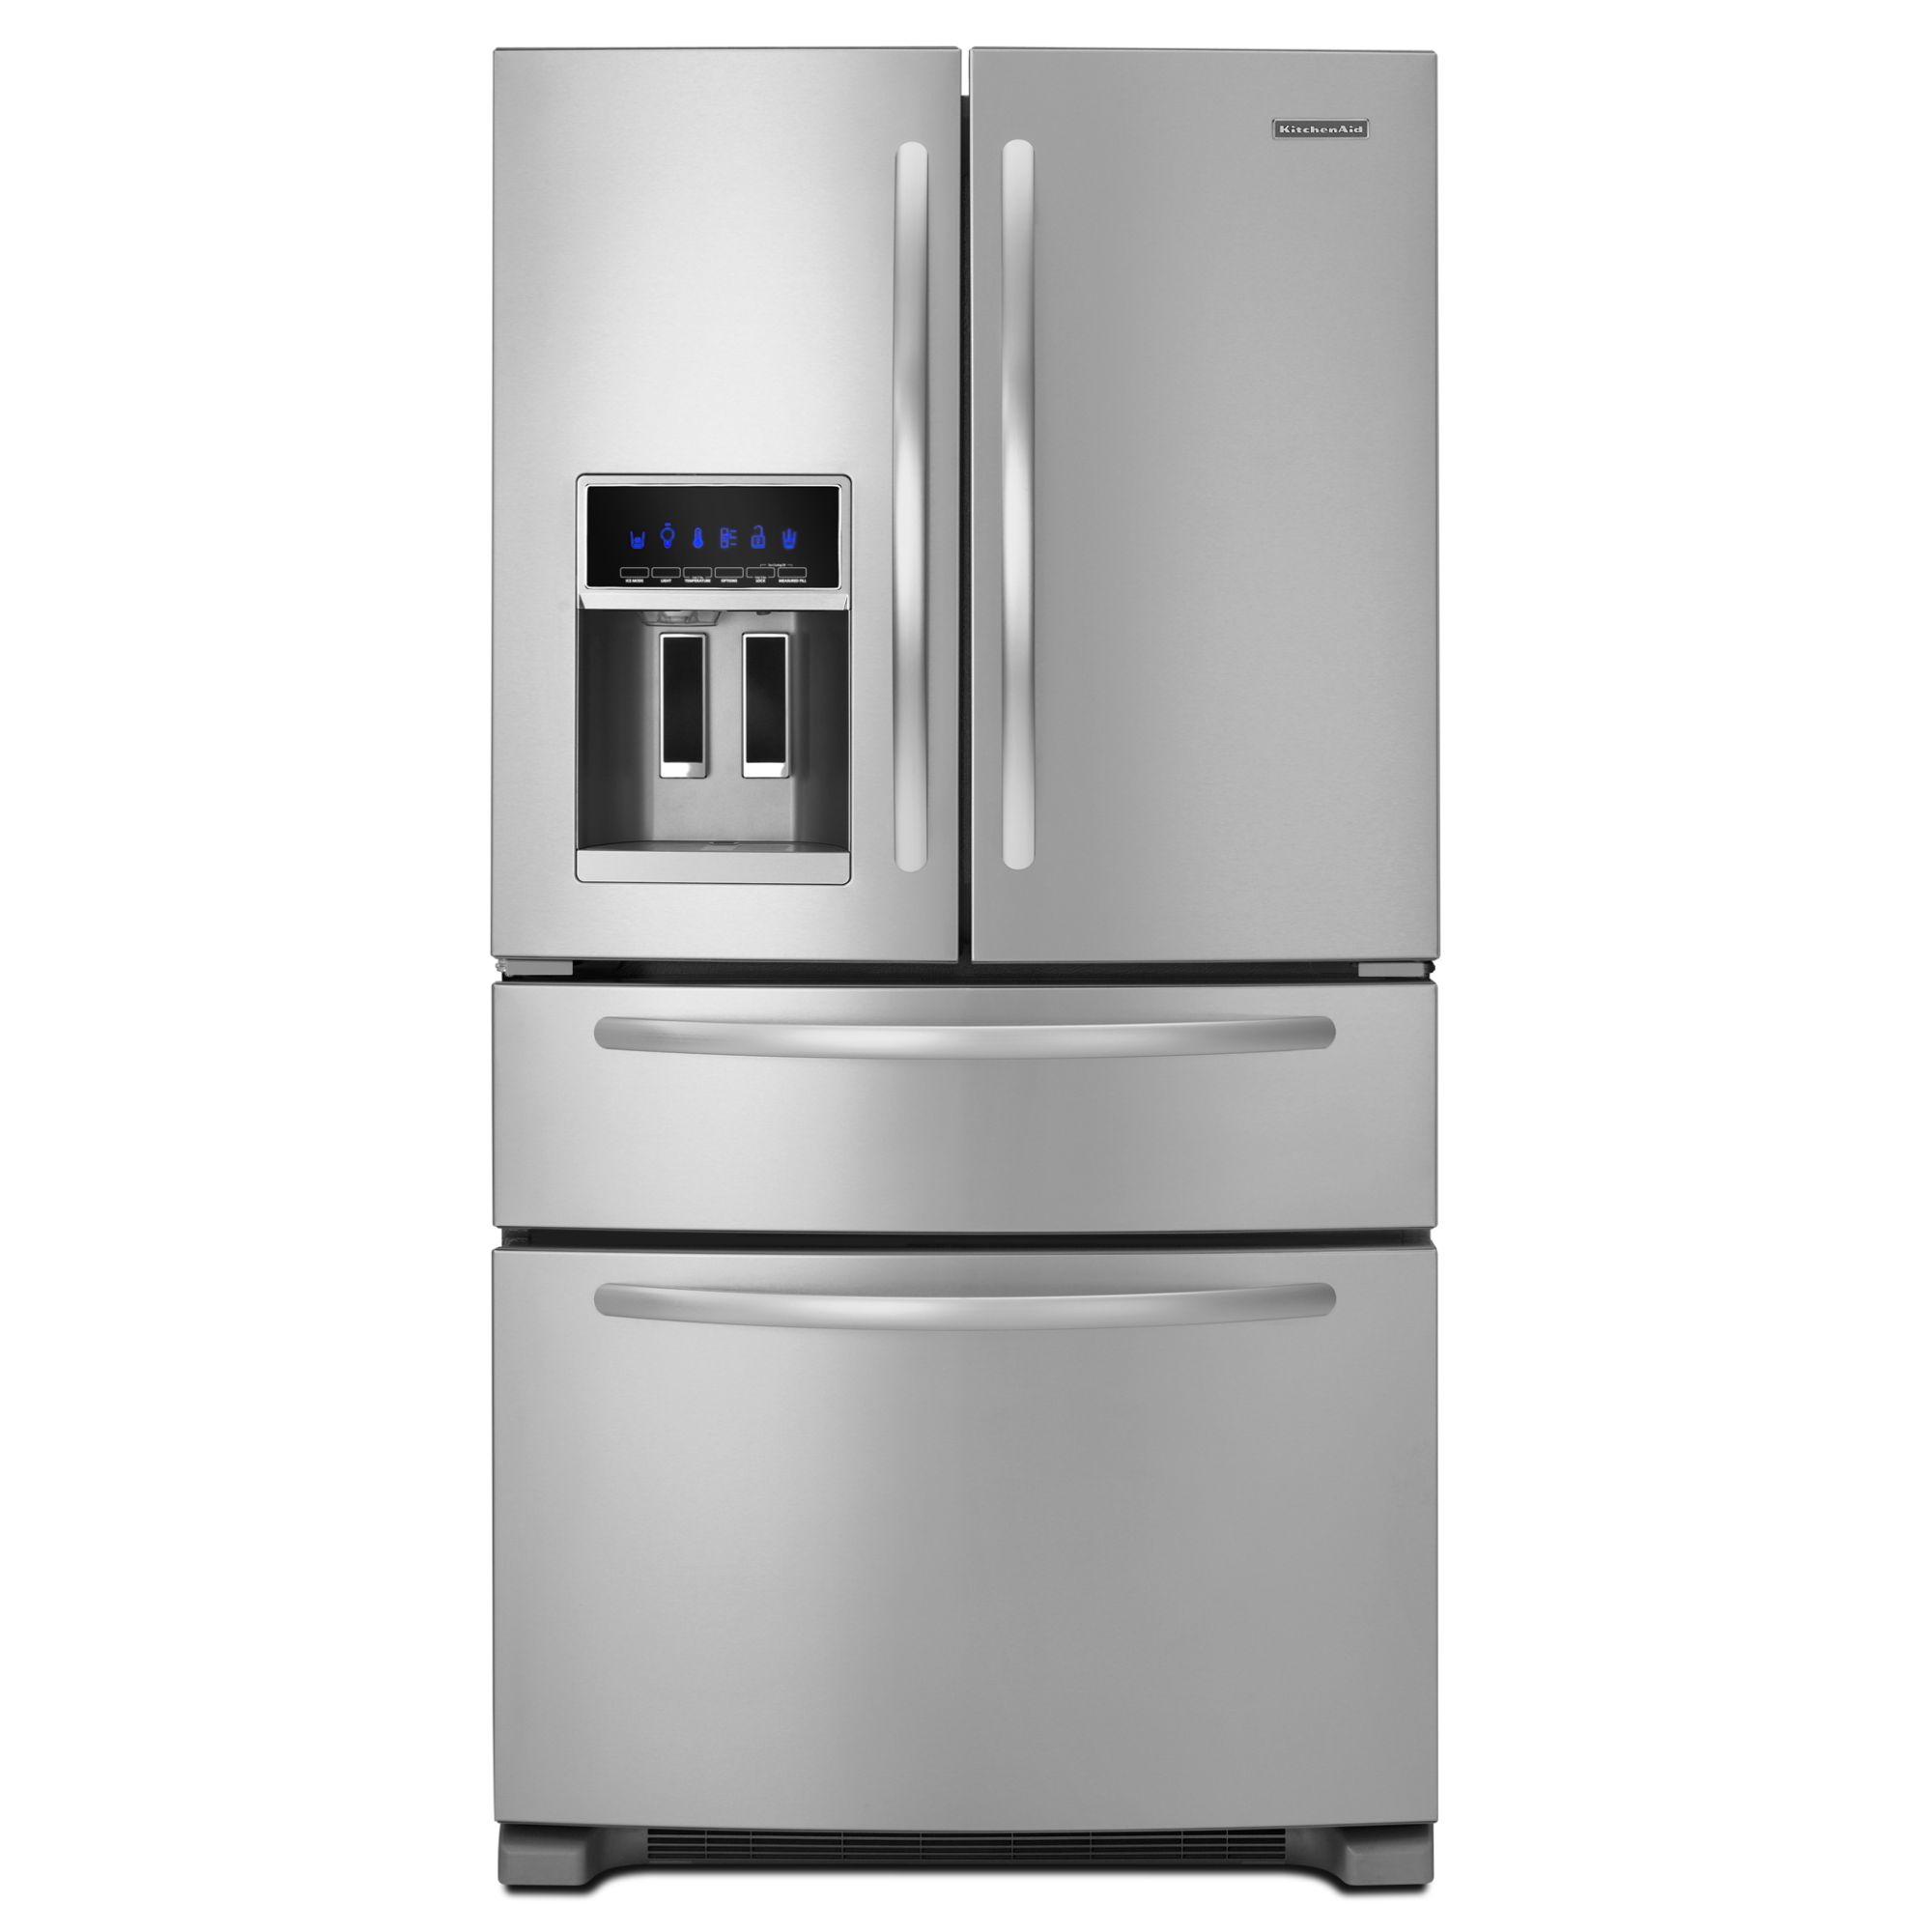 UPC 883049225081 product image for 25.0 cu. ft. French-Door Refrigerator w/ FreshVue™ Drawer - Stainless Stee | upcitemdb.com